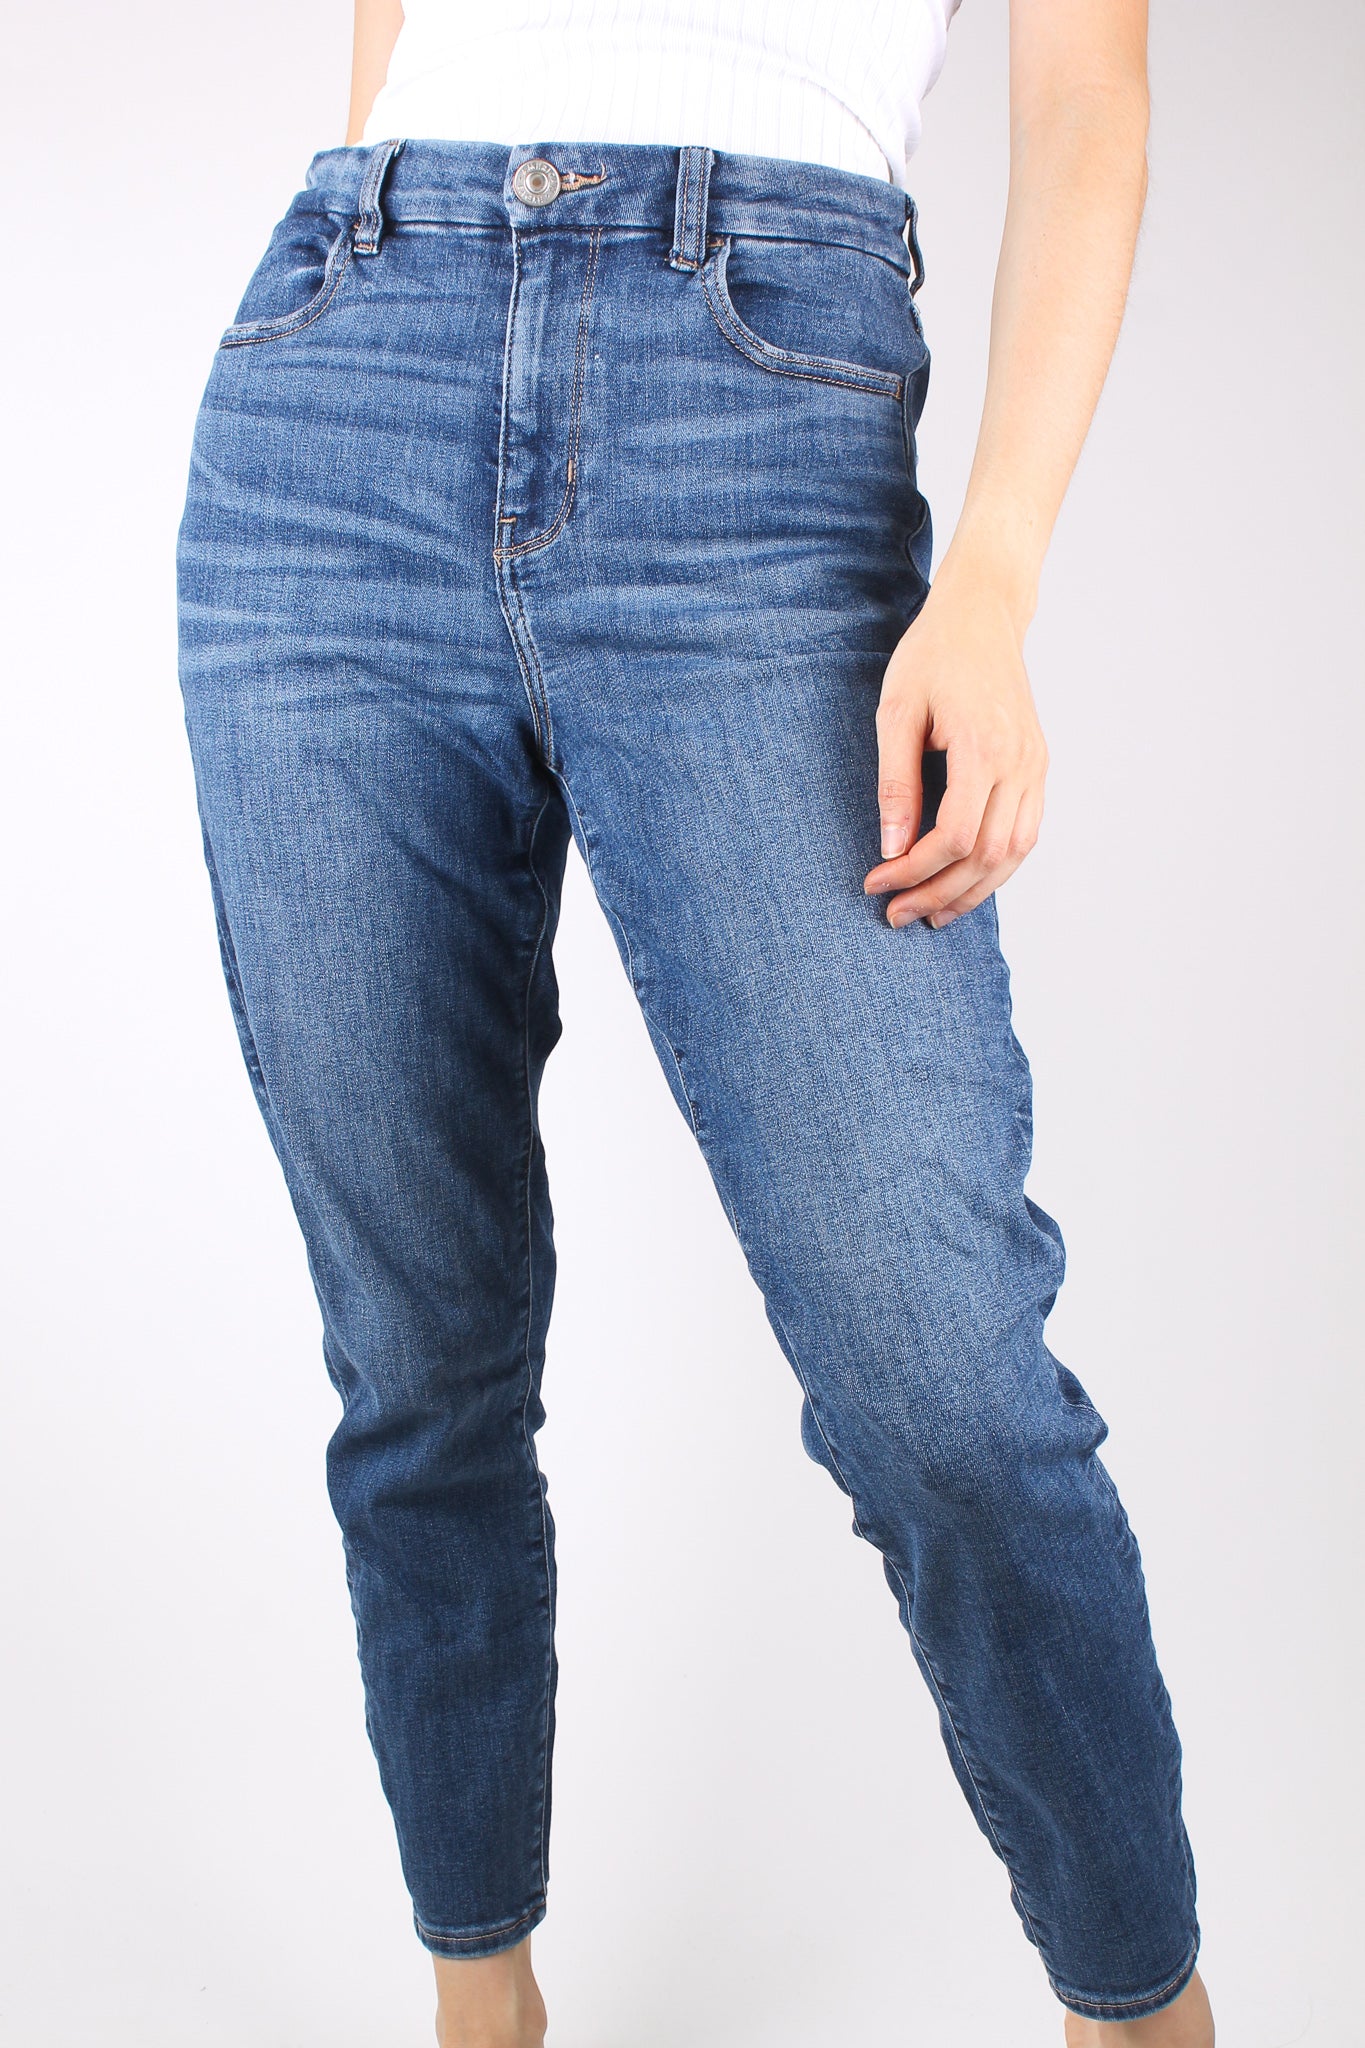 AMERICAN EAGLE OUTFITTERS - Jeans Strech Azul